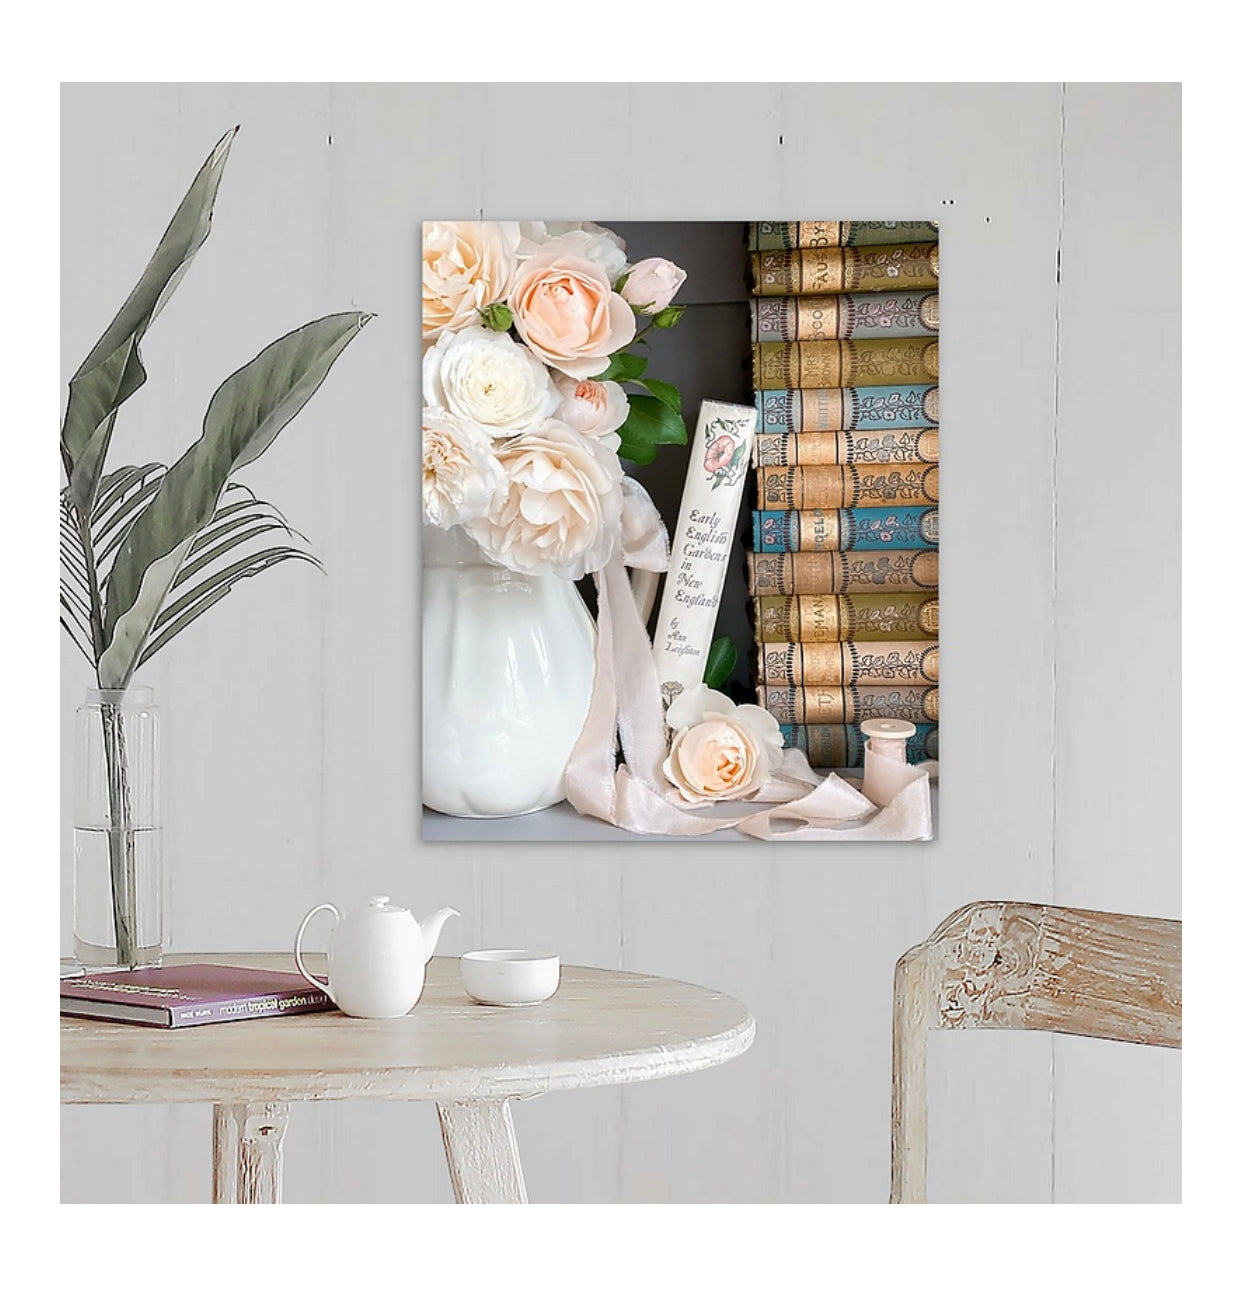 Vintage Poetry Books and Roses Gallery Wrapped Canvas